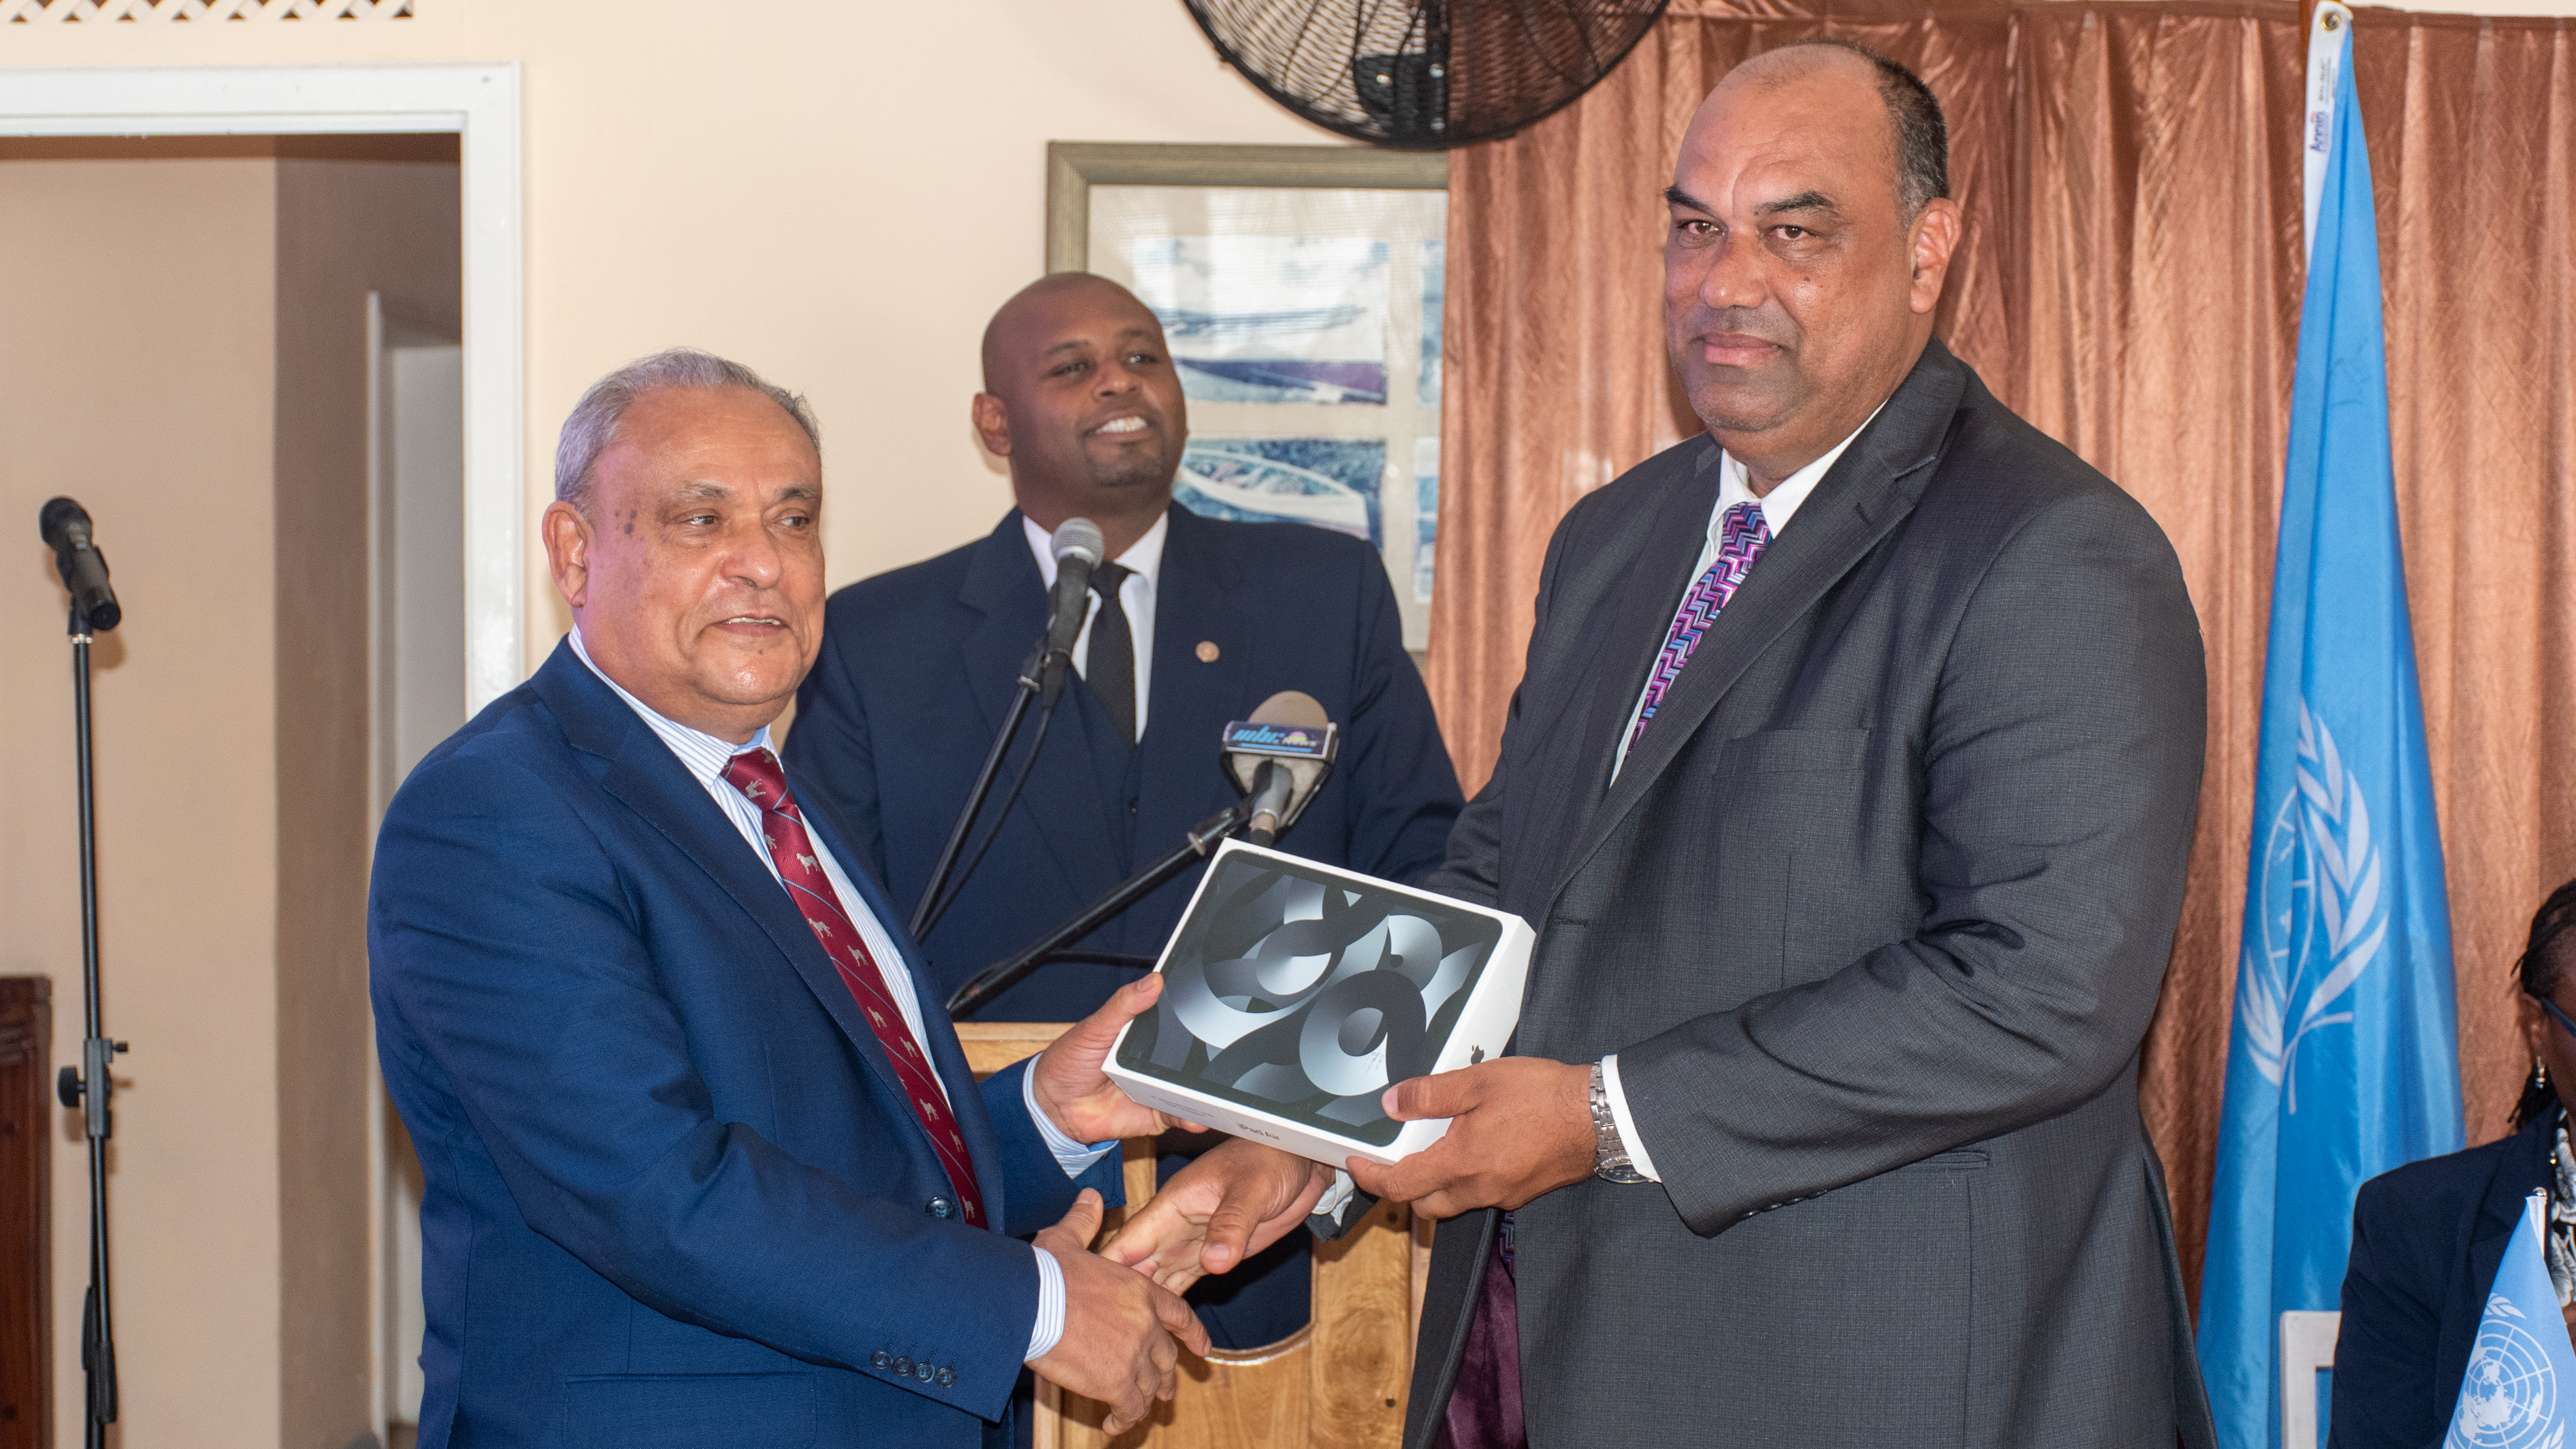 Launch of E-Parliament System for Rodrigues Regional Assembly